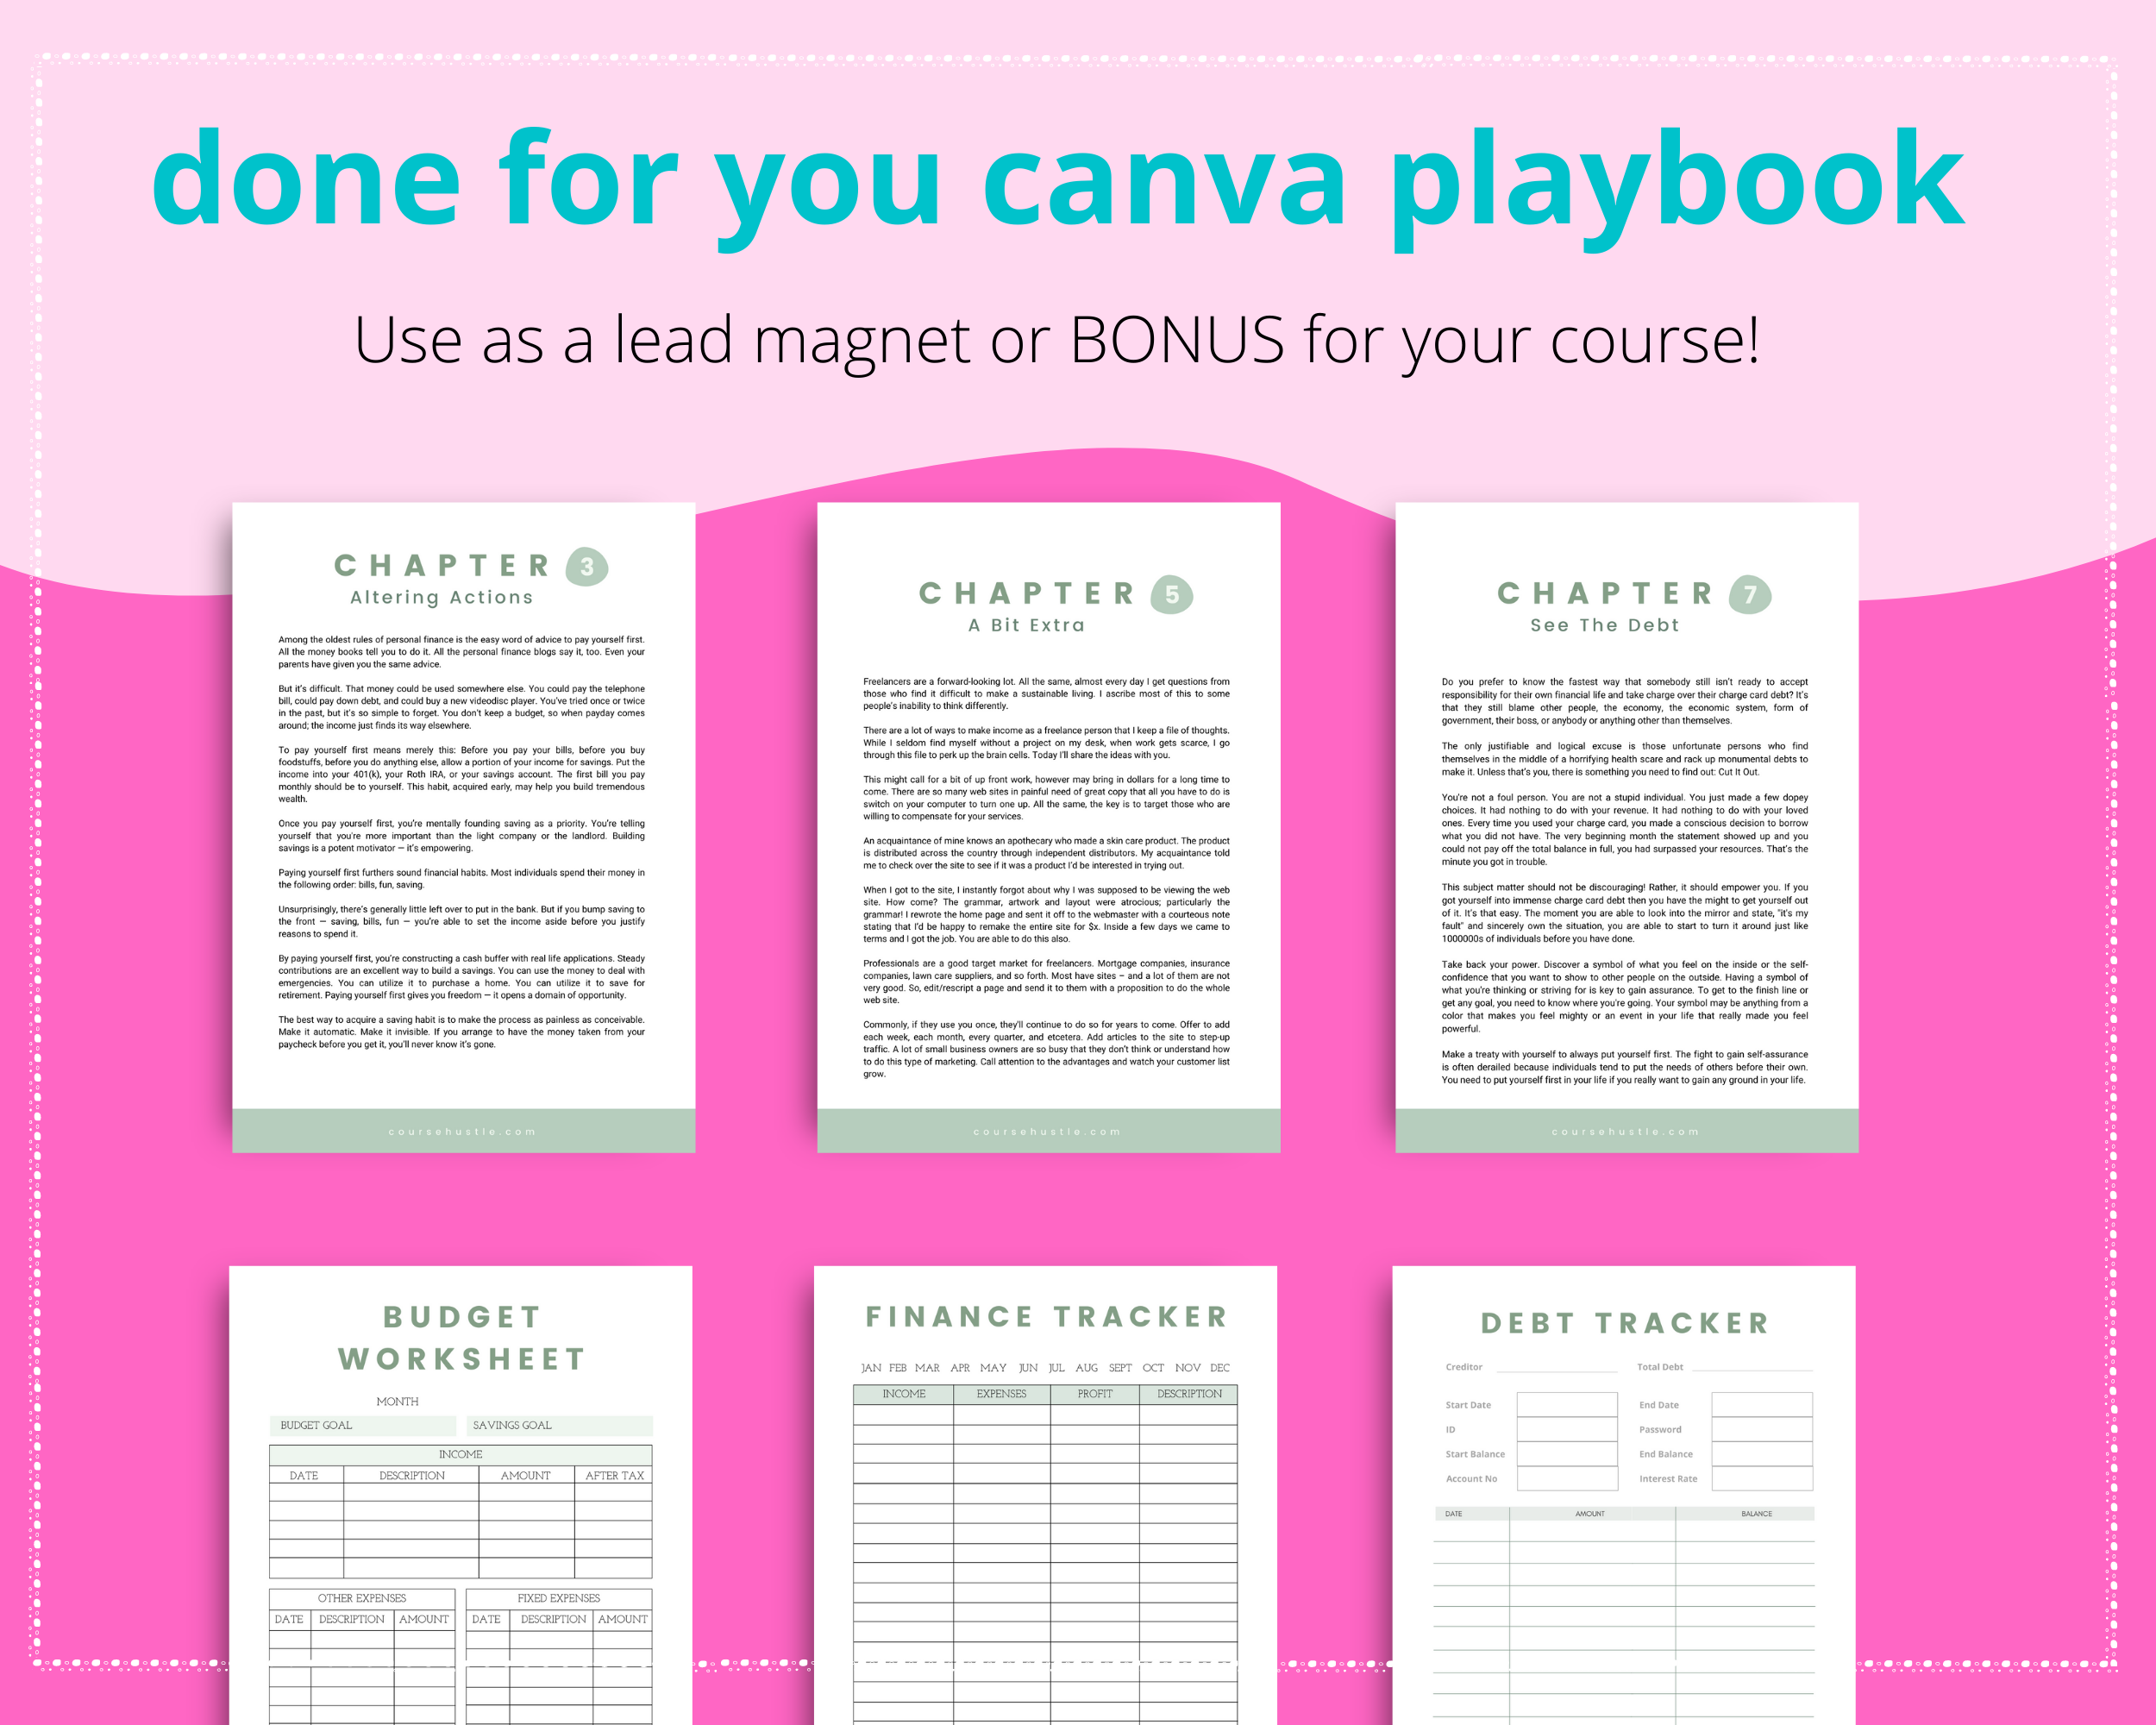 Done for You Finance Intelligence Playbook in Canva | Editable A4 Size Canva Template